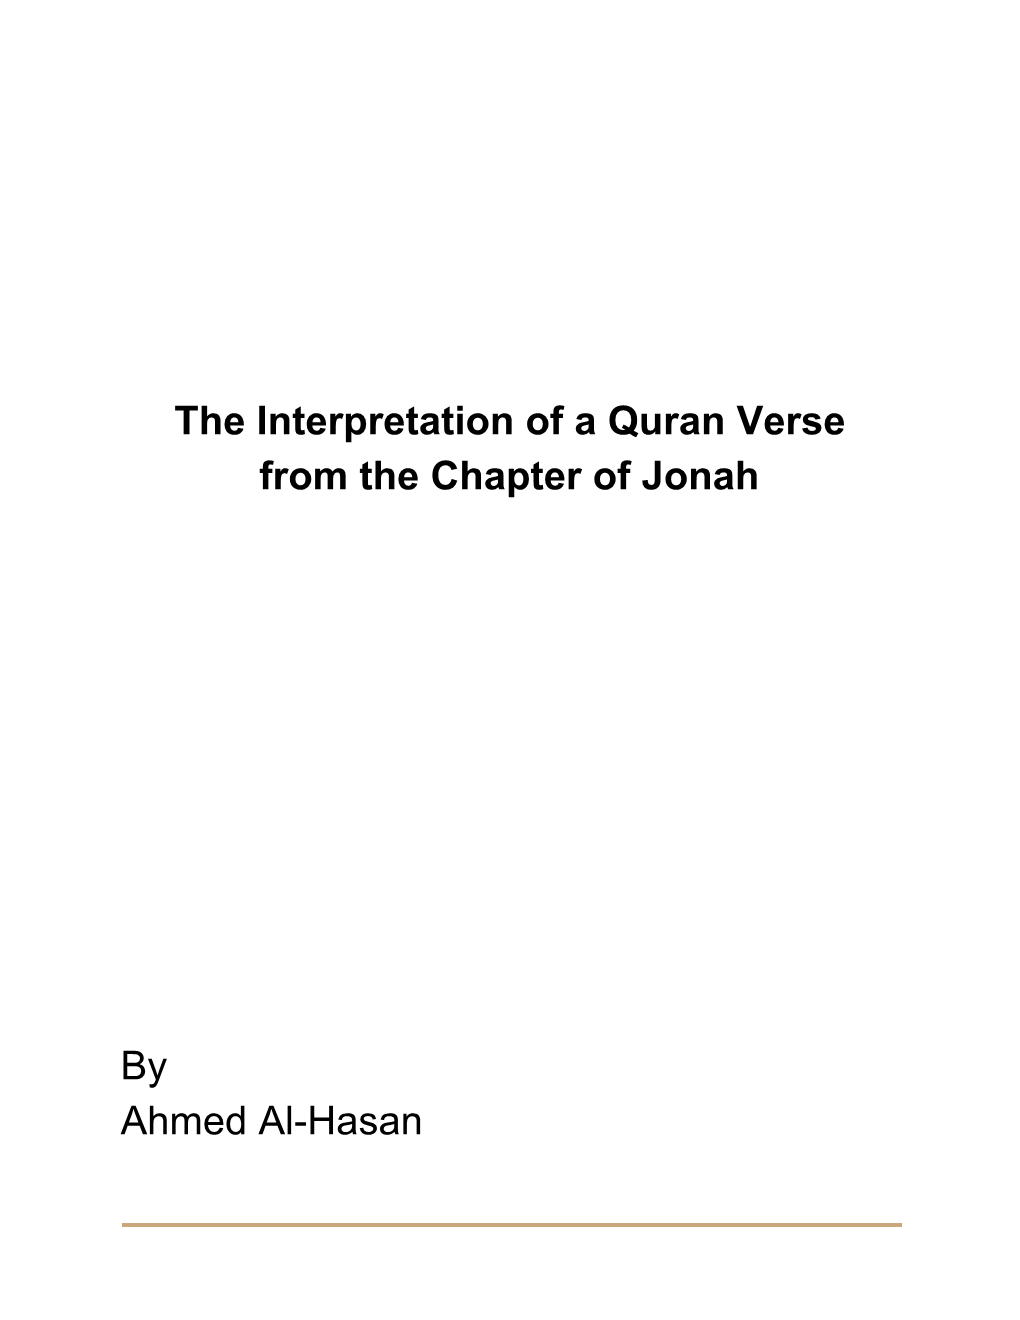 The Interpretation of a Quran Verse from the Chapter of Jonah